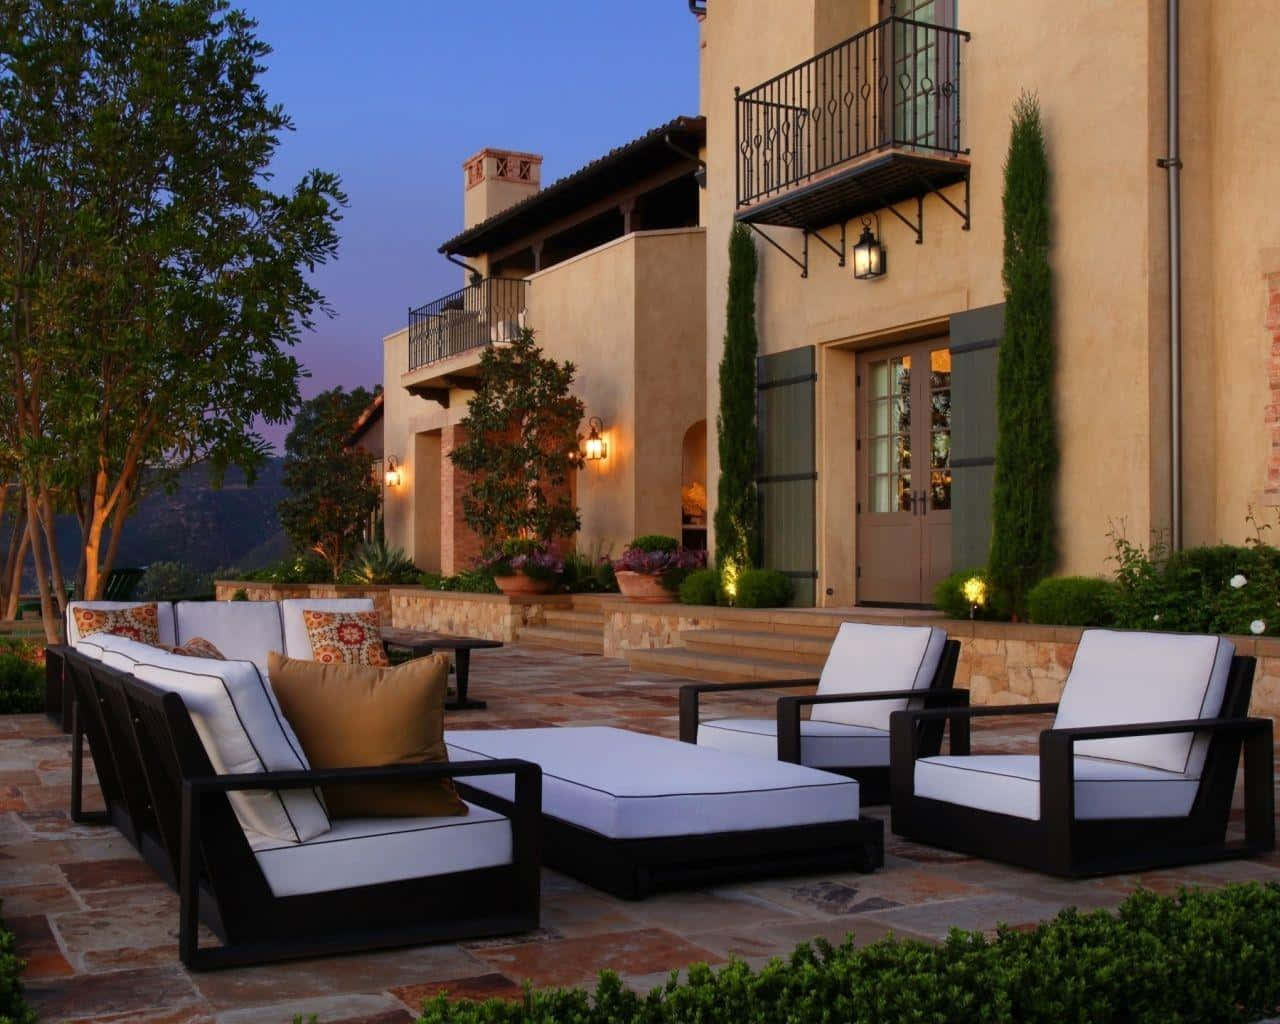 A Patio With Furniture And Lighting At Dusk